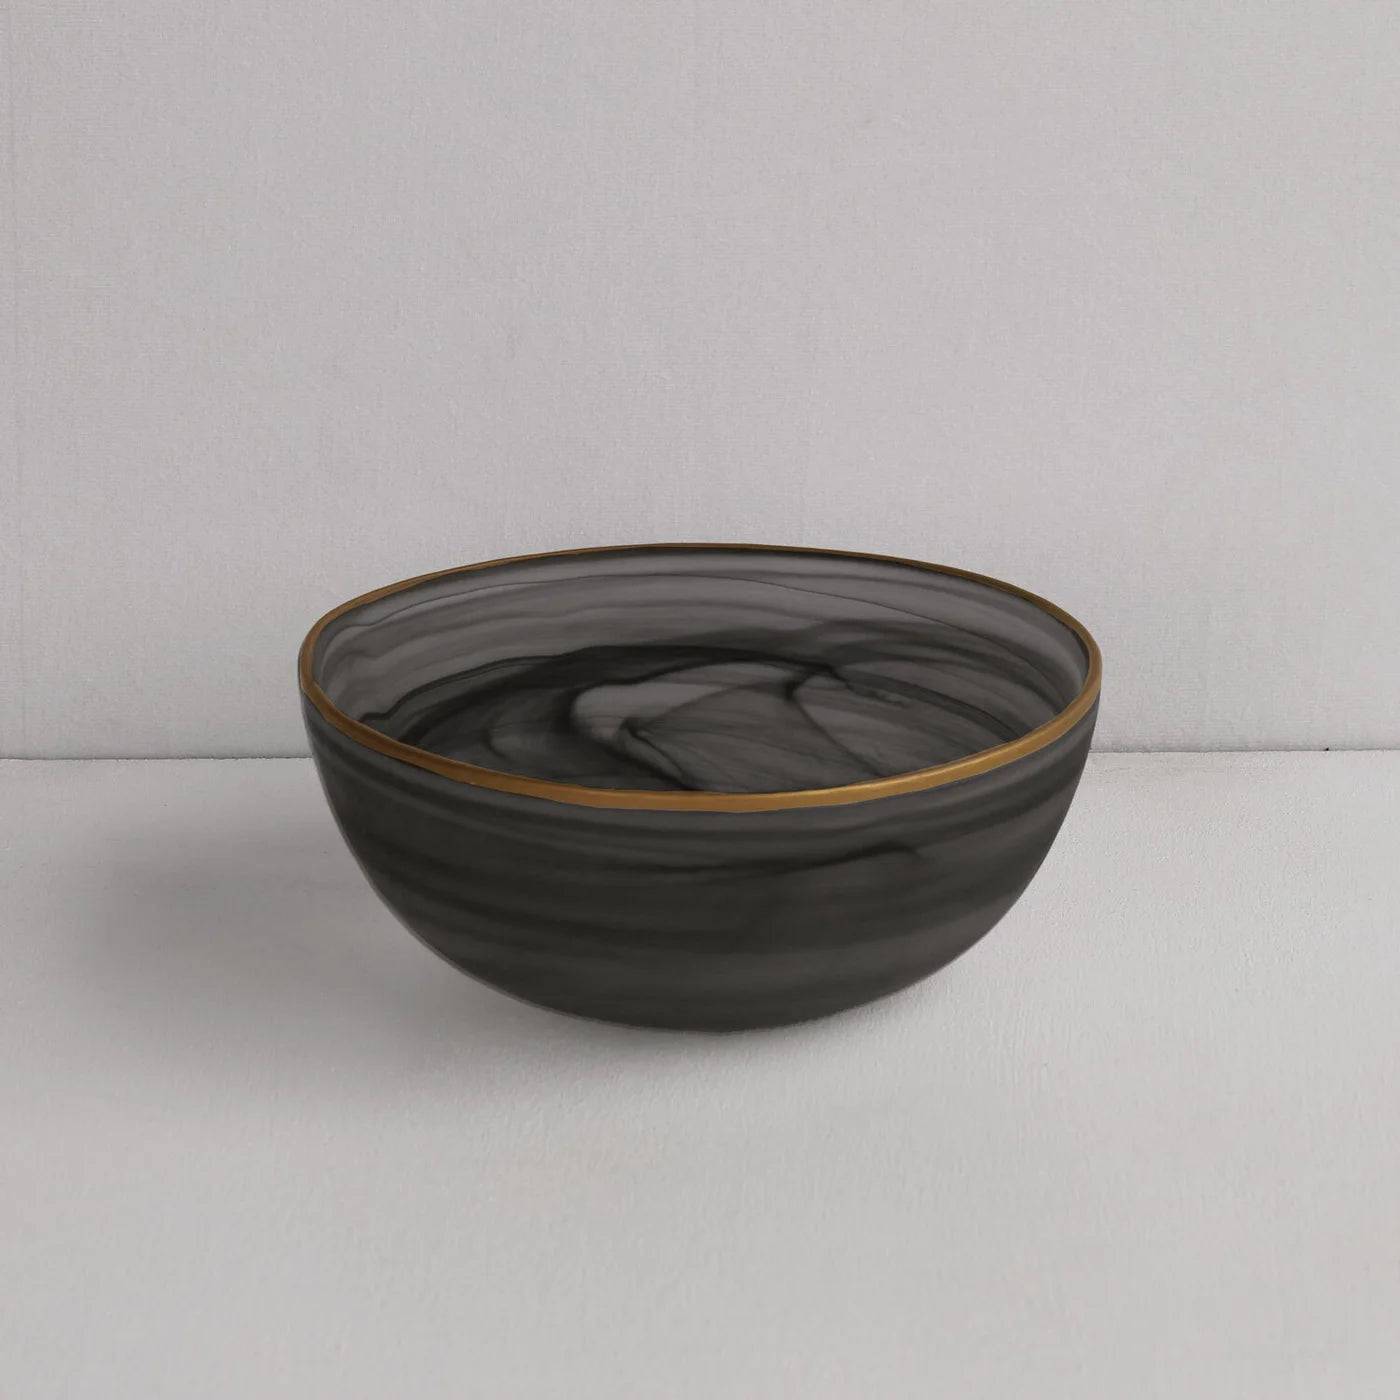 BEATRIZ BALL- GLASS Frosted Black Alabaster Medium Bowl with Gold Rim (Black and Gold) - Findlay Rowe Designs